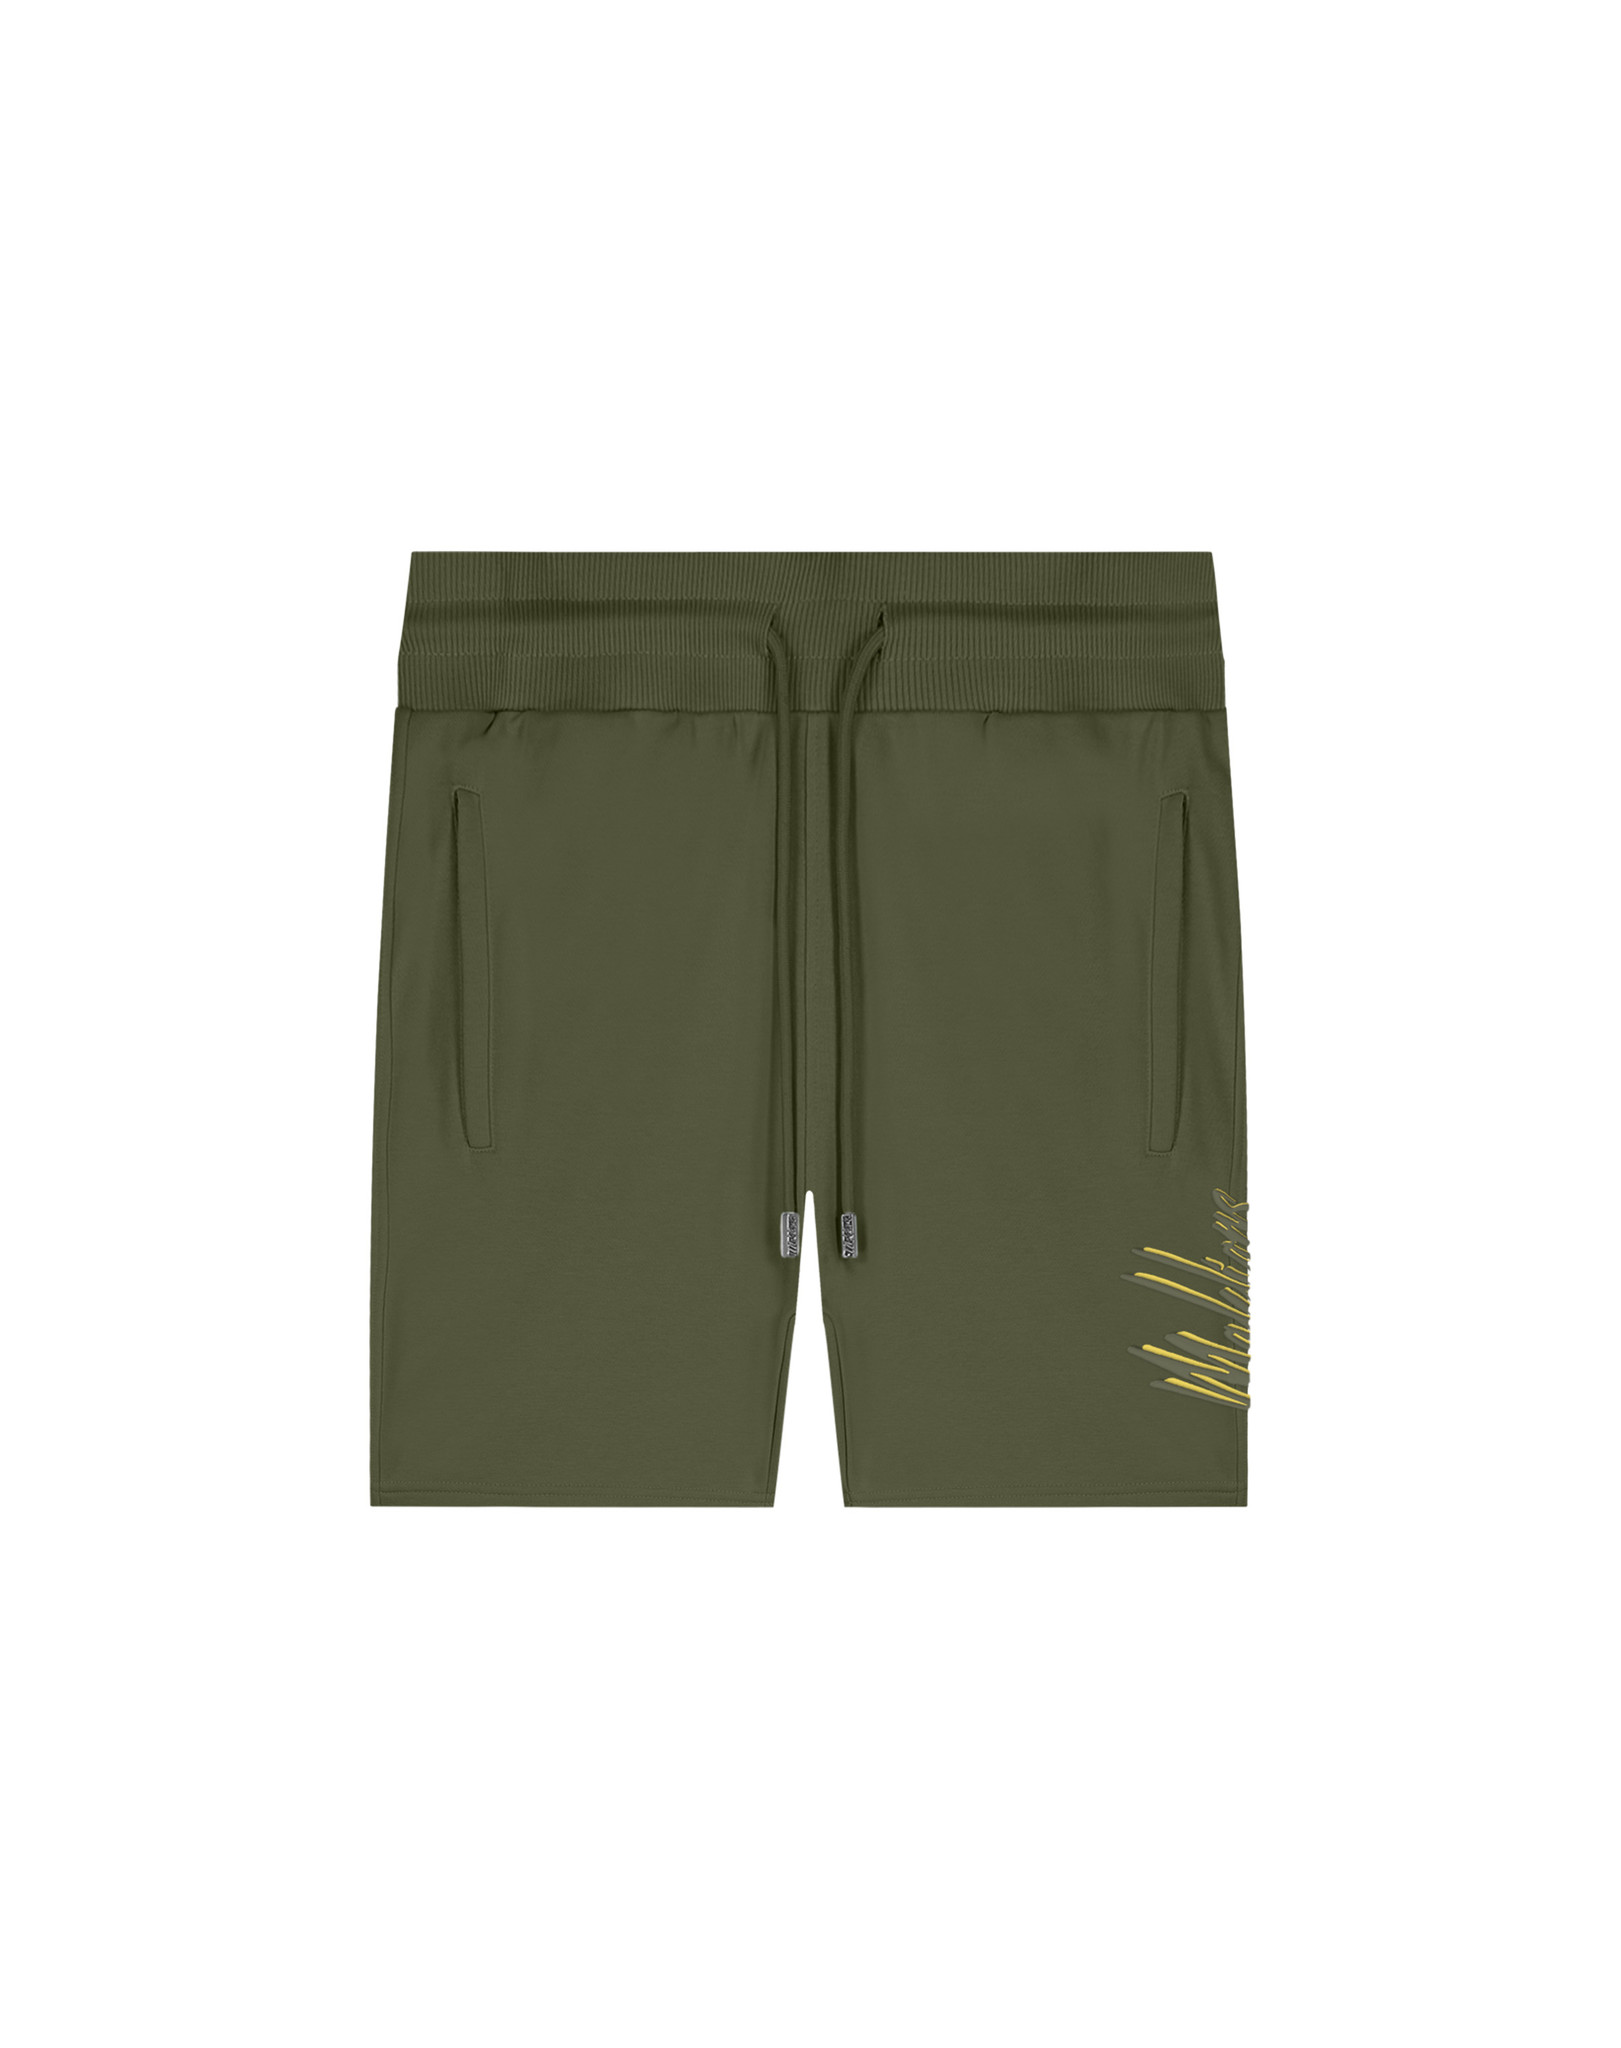 Malelions Men Duo Essentials Short - Army/Yellow